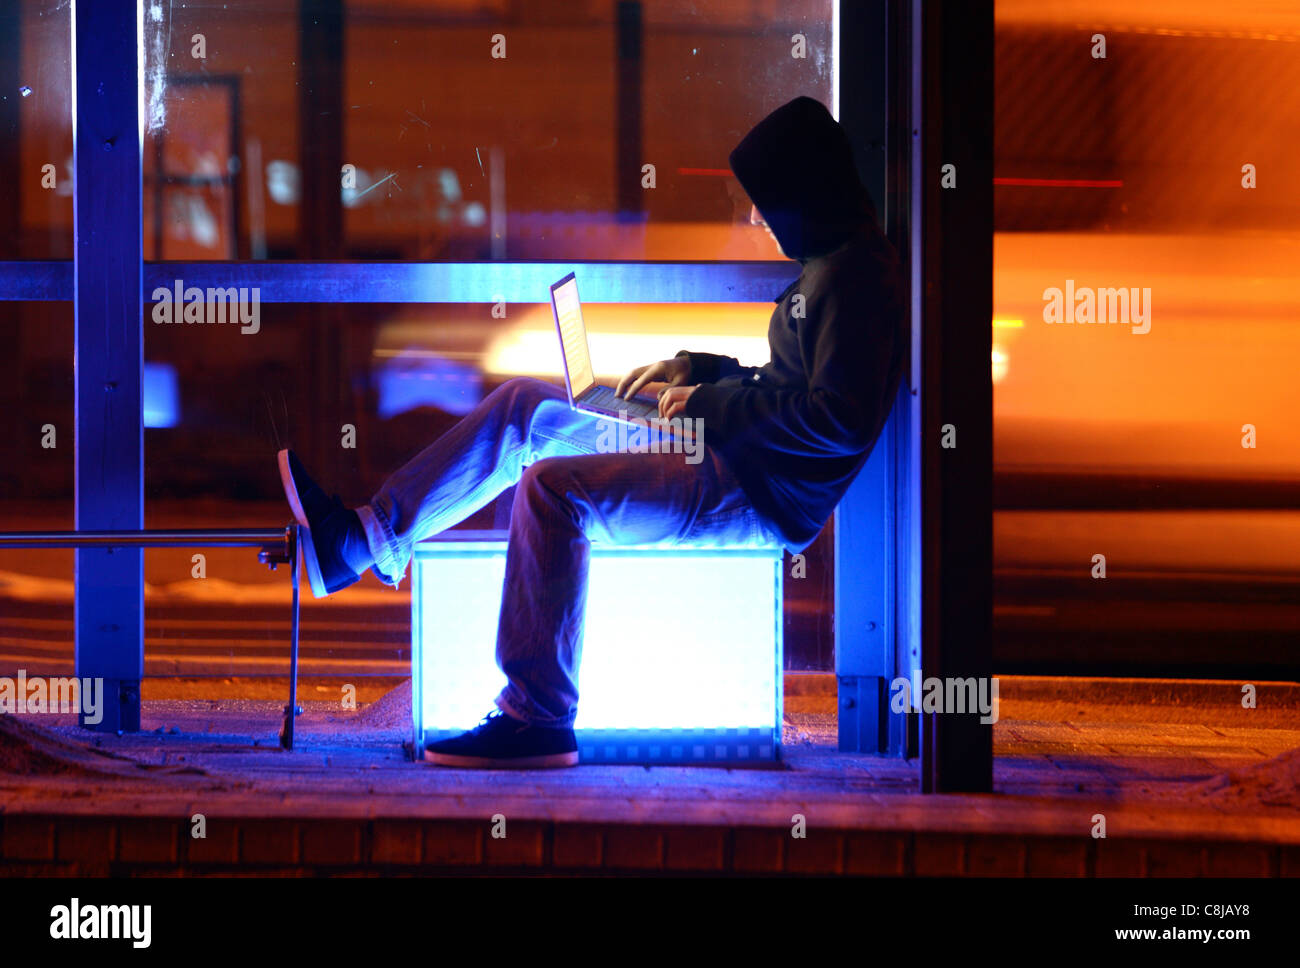 Computer user, hacker, sits conspiratorially, outside,  bus stop,  with a laptop. Symbol picture, computer-Internet crime. Stock Photo